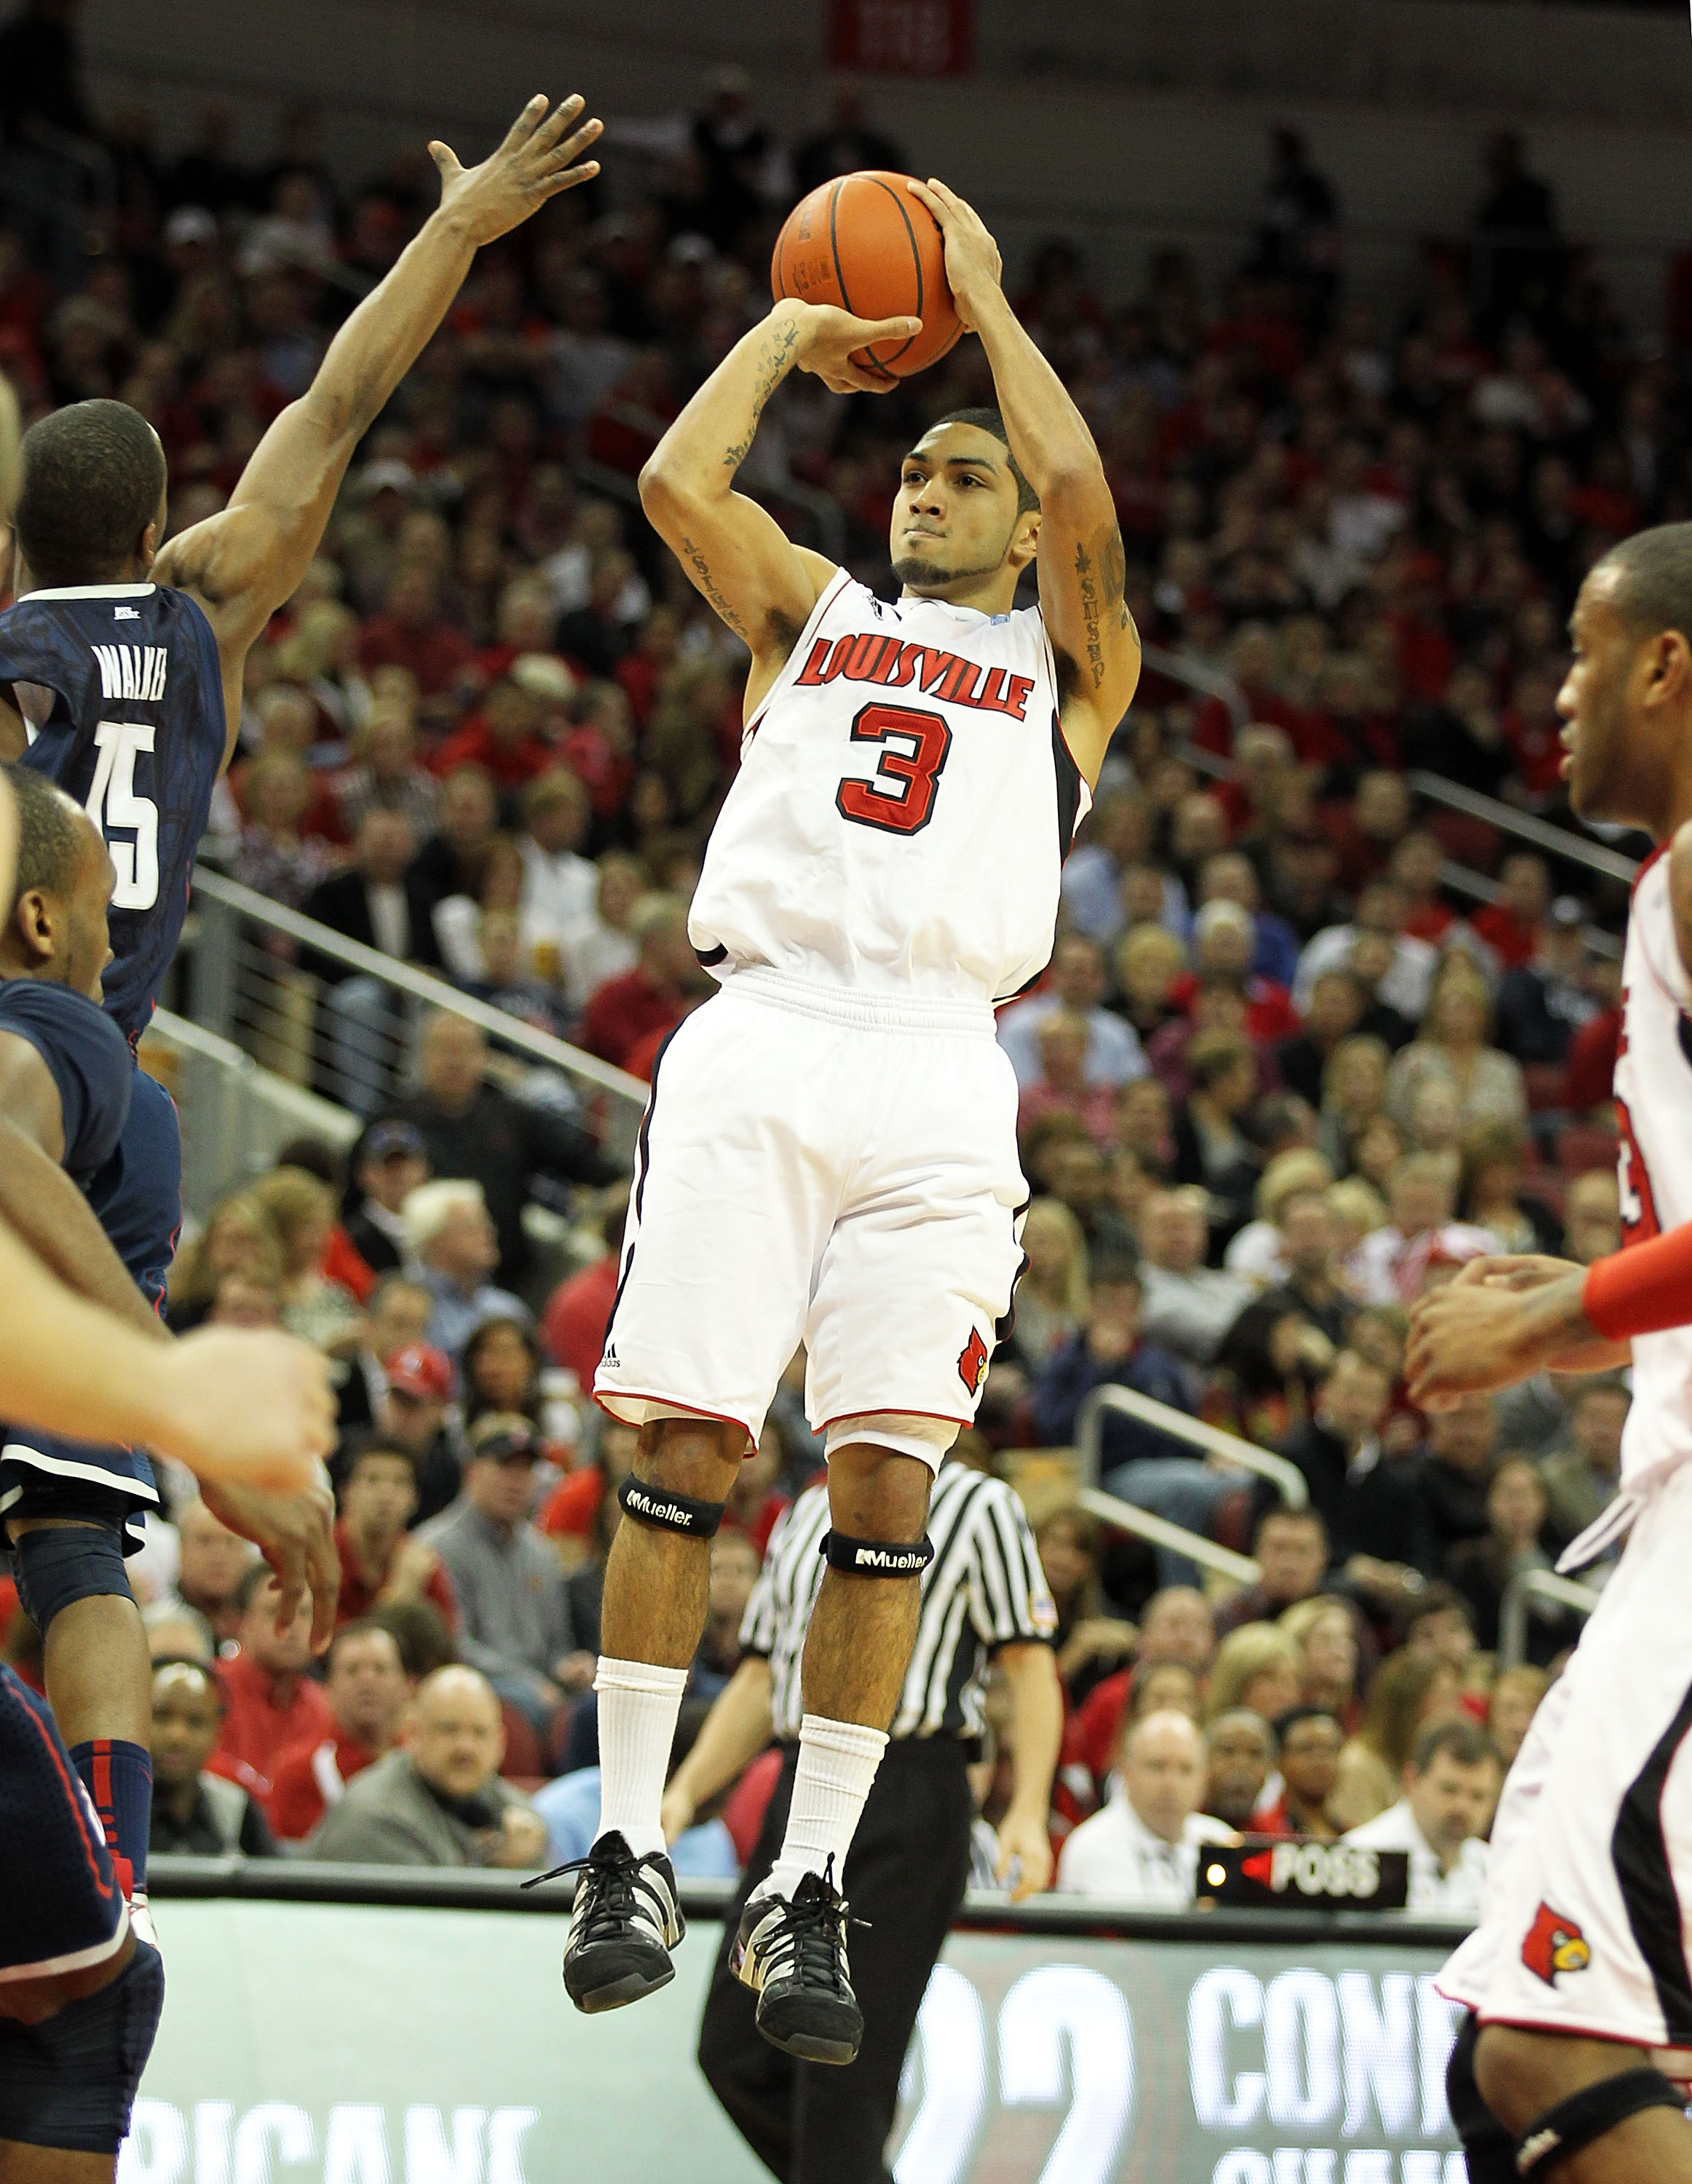 LOUISVILLE, KY - FEBRUARY 18:  Peyton Siva #3 of the Louisville Cardinals shoots the ball during the Big East Conference game against the Connecticut Huskies at the KFC Yum! Center on February 18, 2011 in Louisville, Kentucky.  (Photo by Andy Lyons/Getty